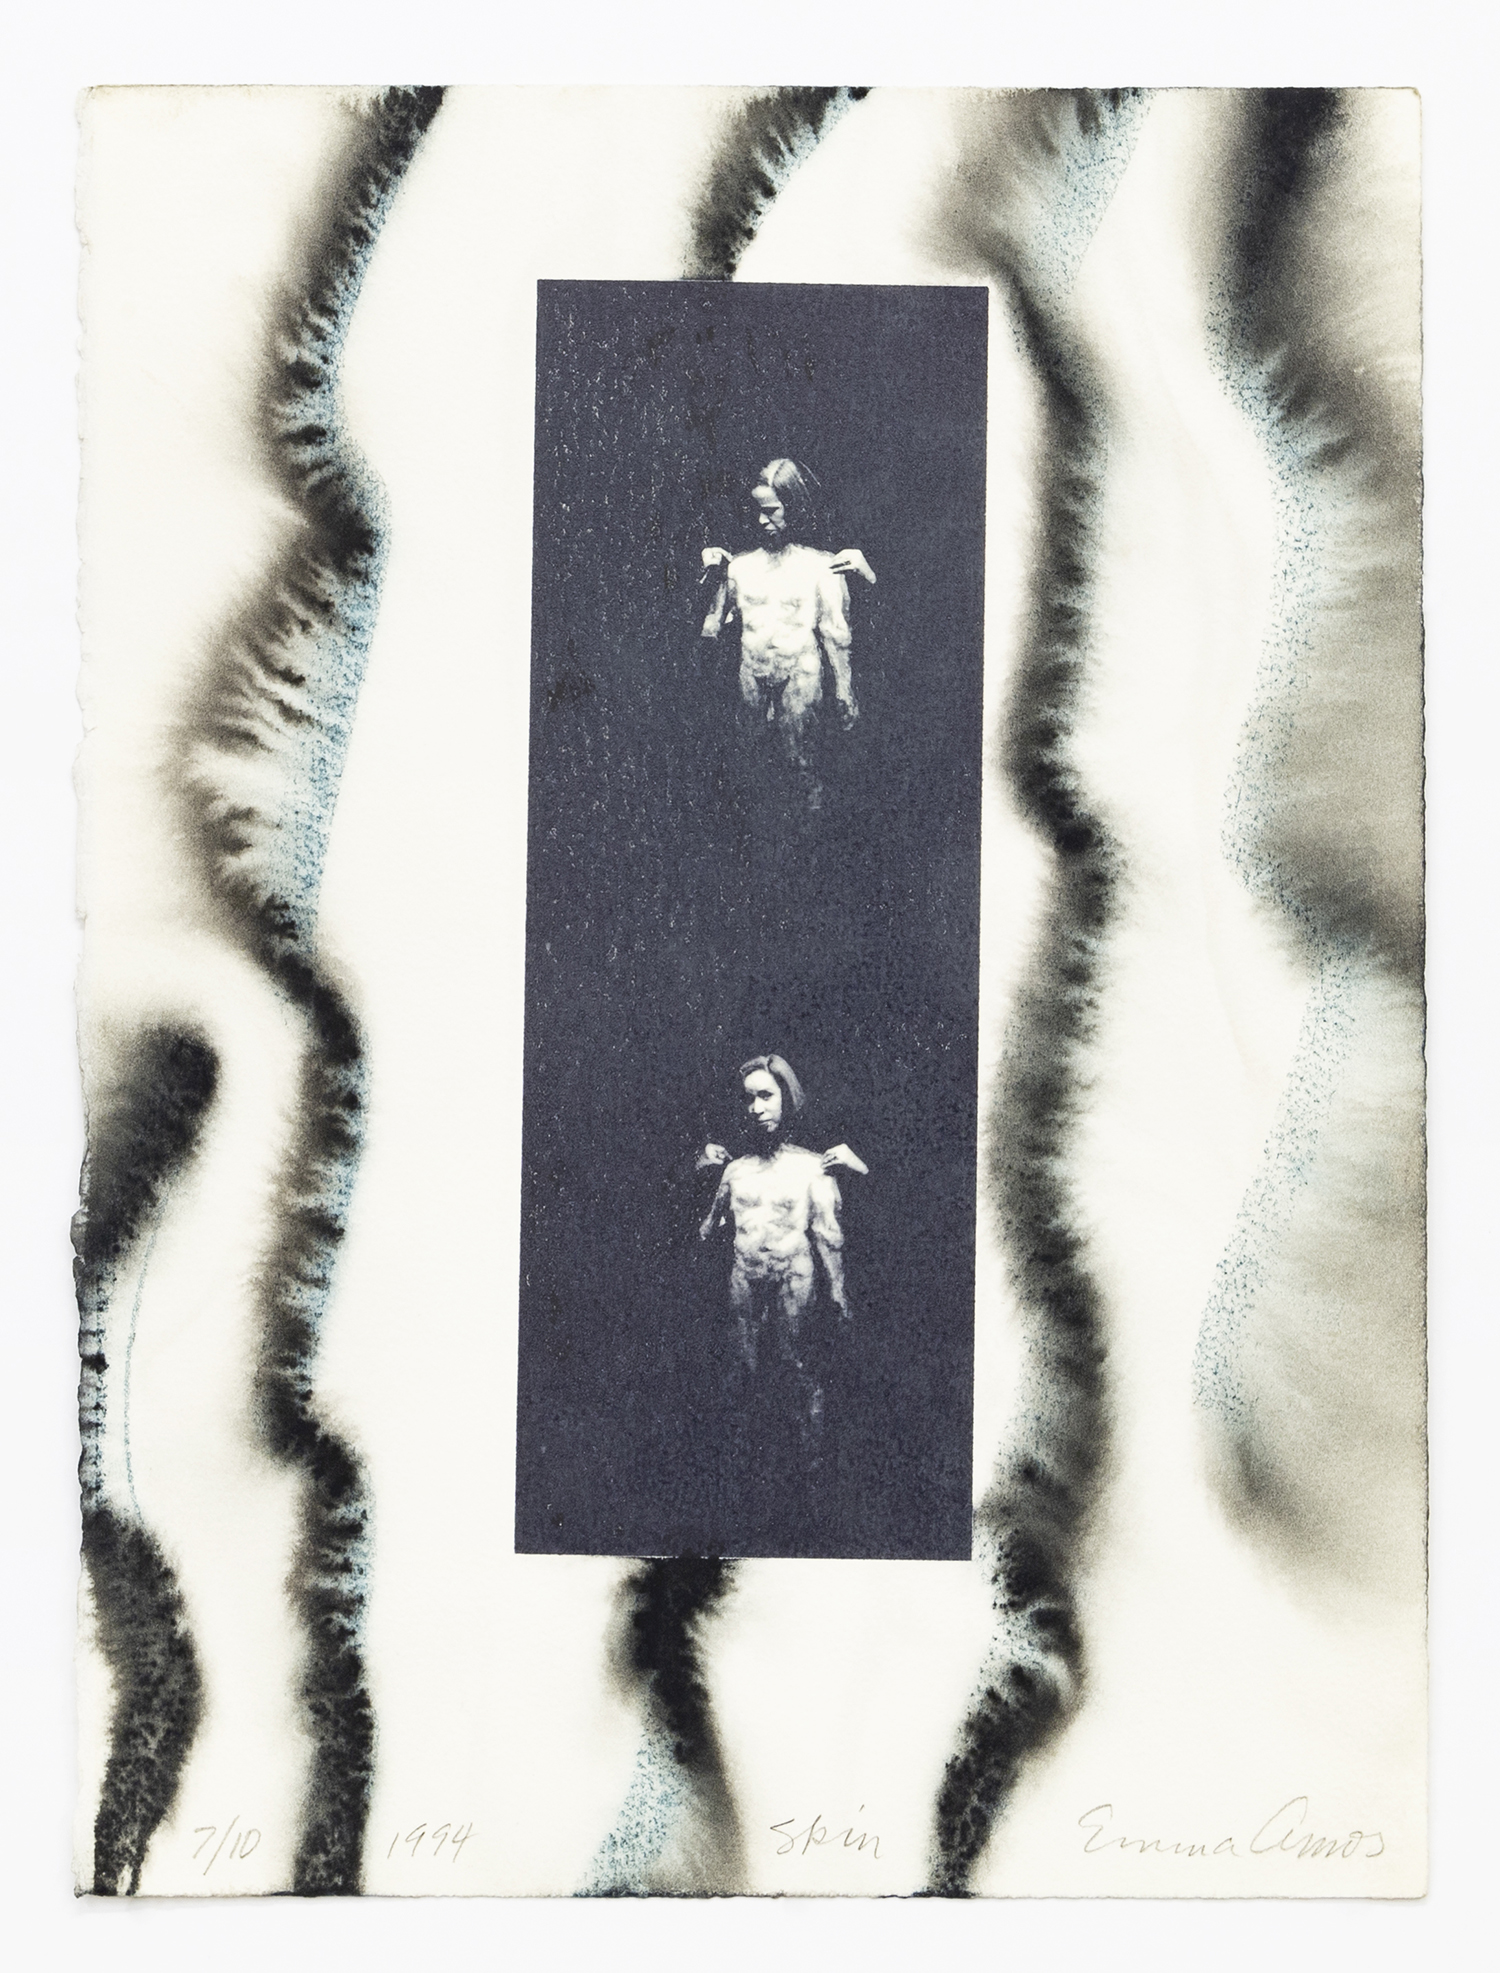 EMMA AMOS (b. 1937, Atlanta, GA – d. 2020, Bedford, NH) Skin, 1994 Monotype with photo transfer 15 x 11 inches (38.1 x 27.9 cm) Edition of 10, all are unique variants